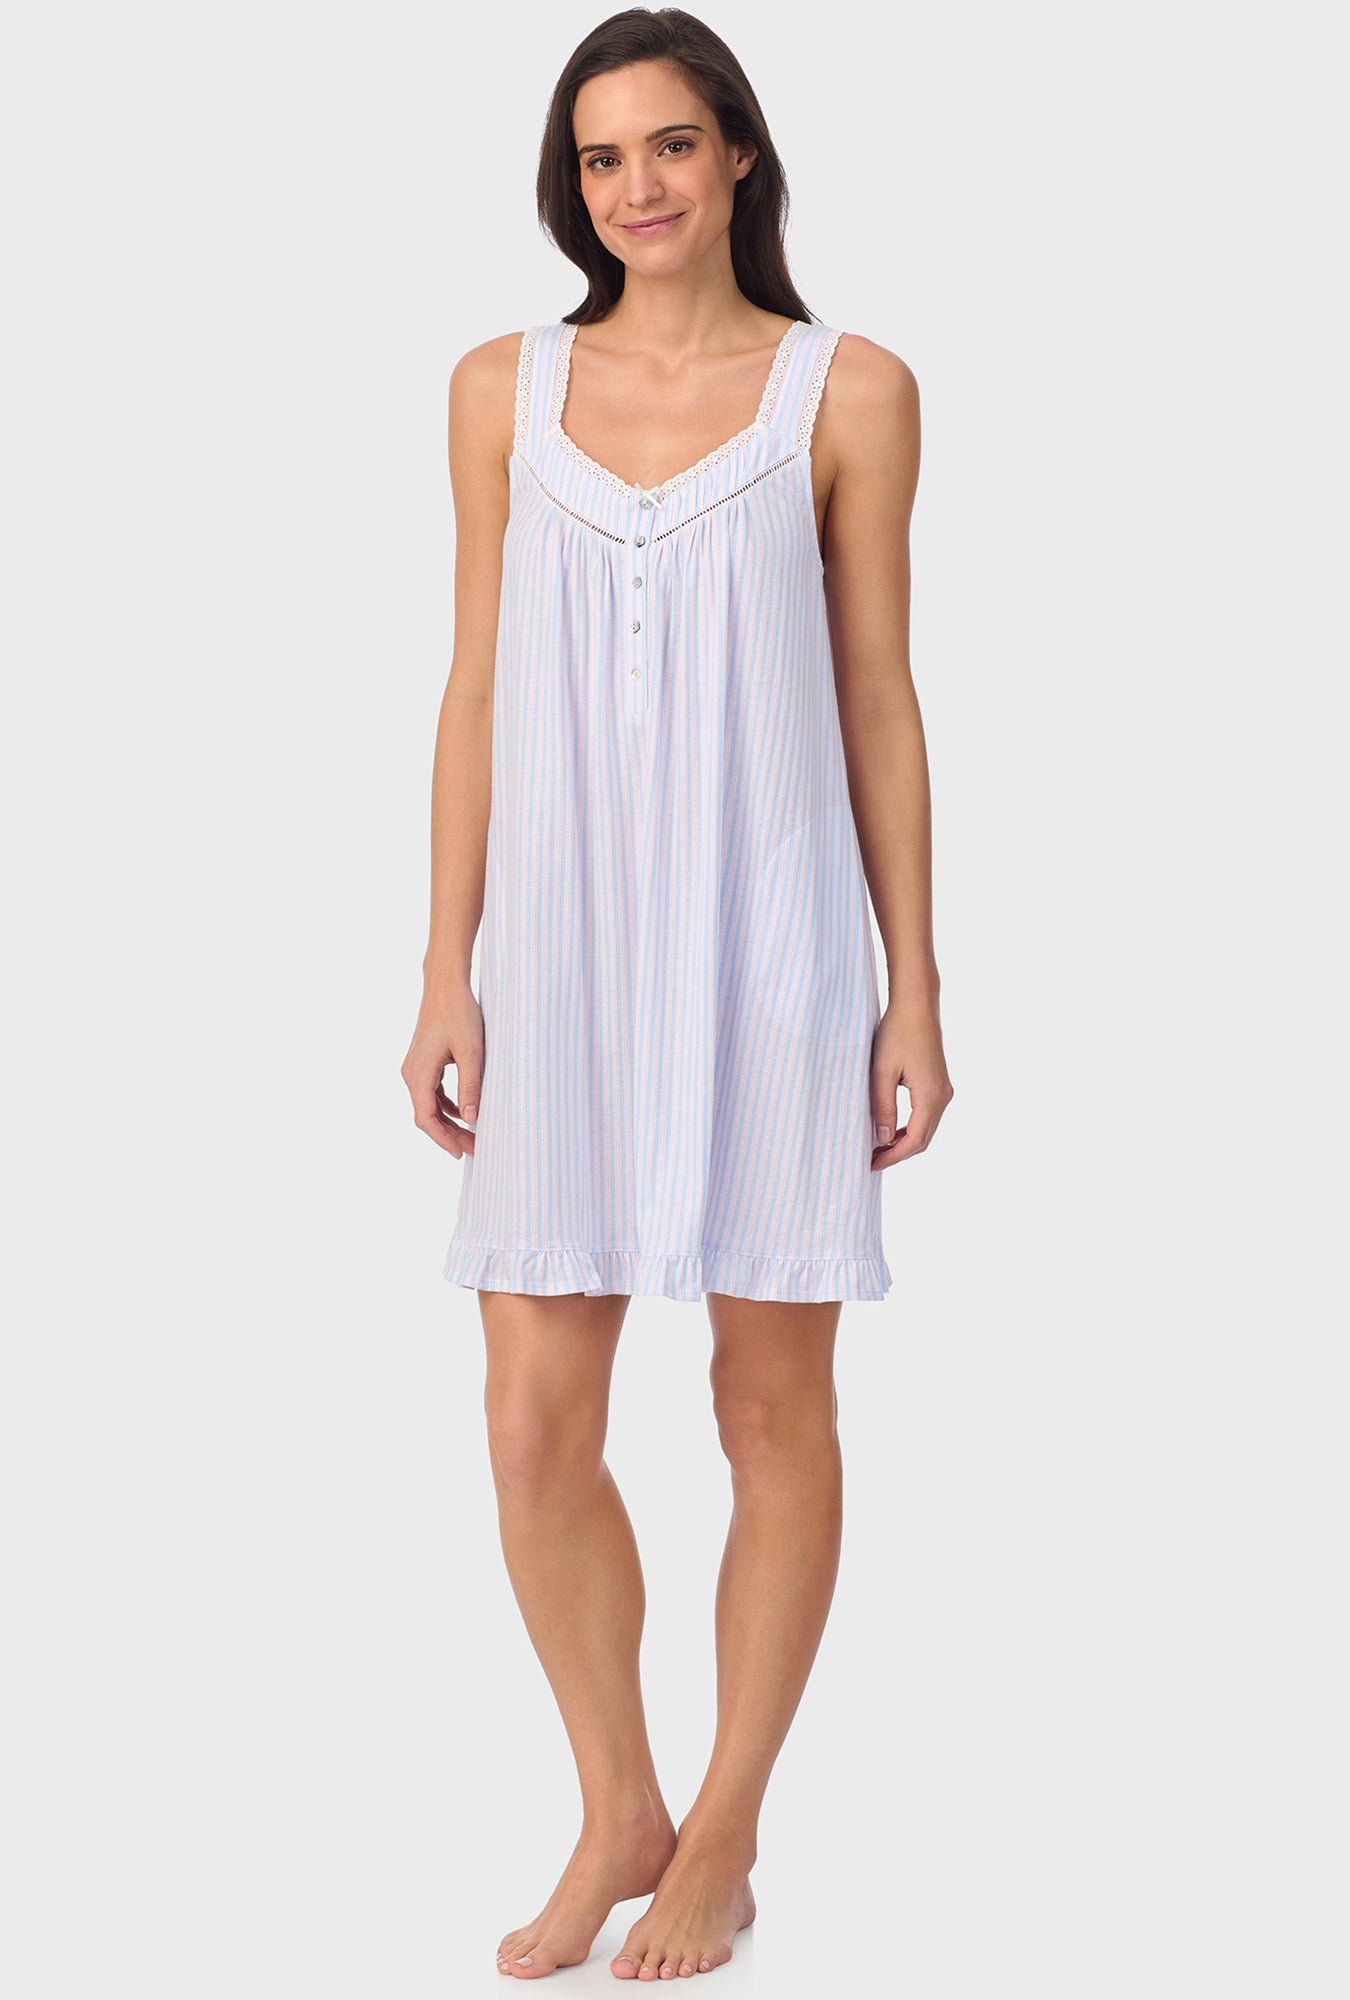 A lady wearing white sleeveless Blossom Stripes Sleeveless Chemise with Cotton Blue print